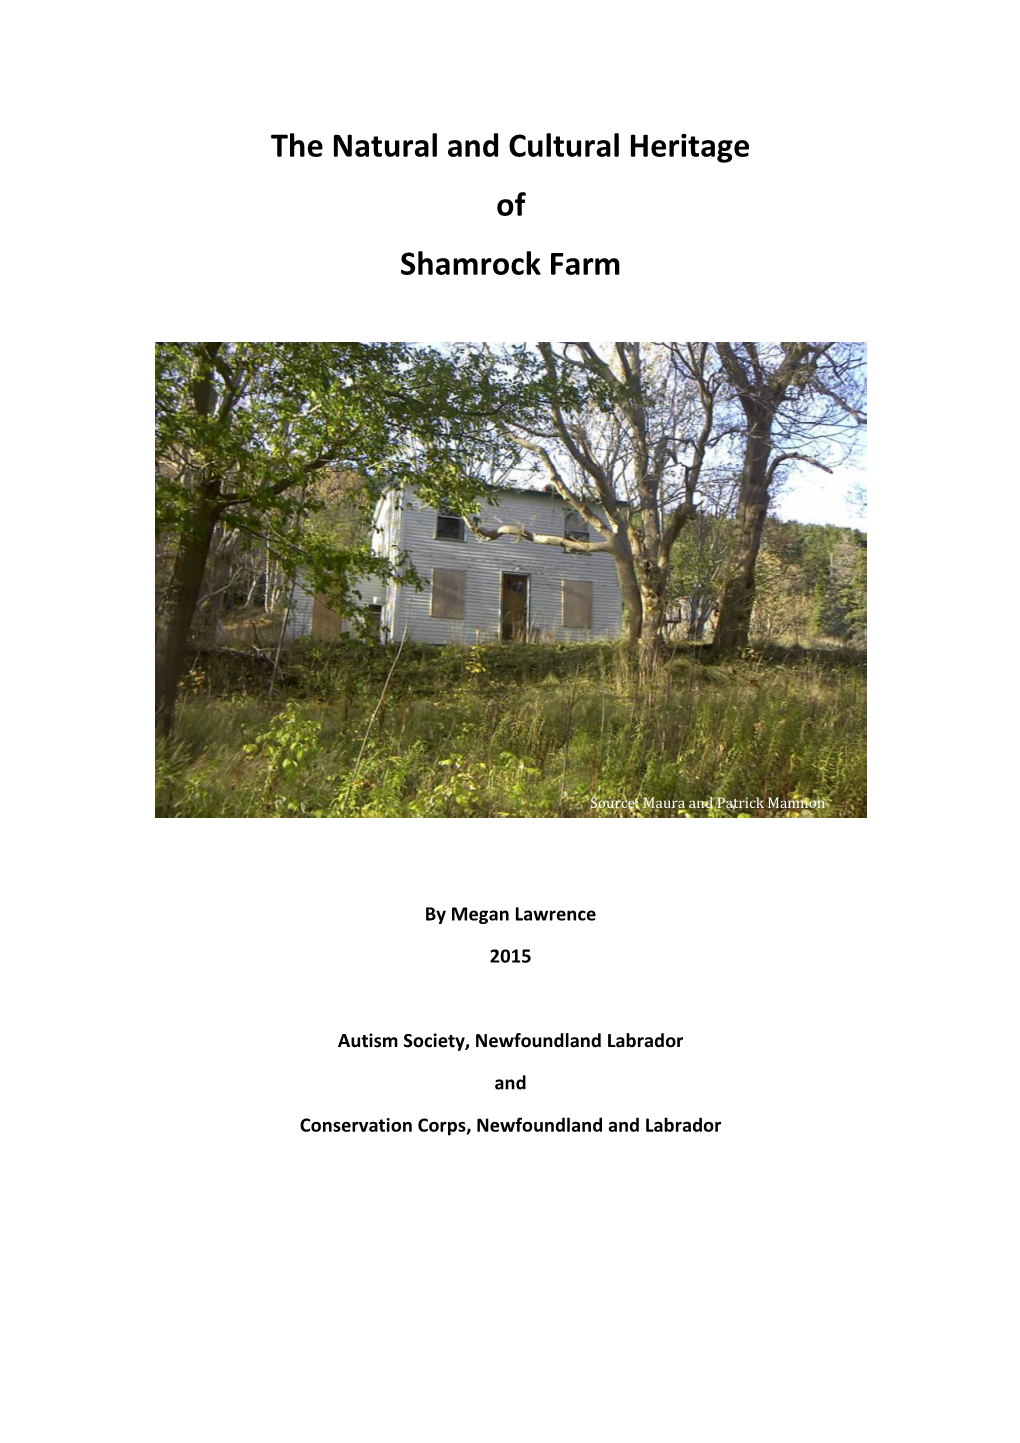 The Natural and Cultural Heritage of Shamrock Farm